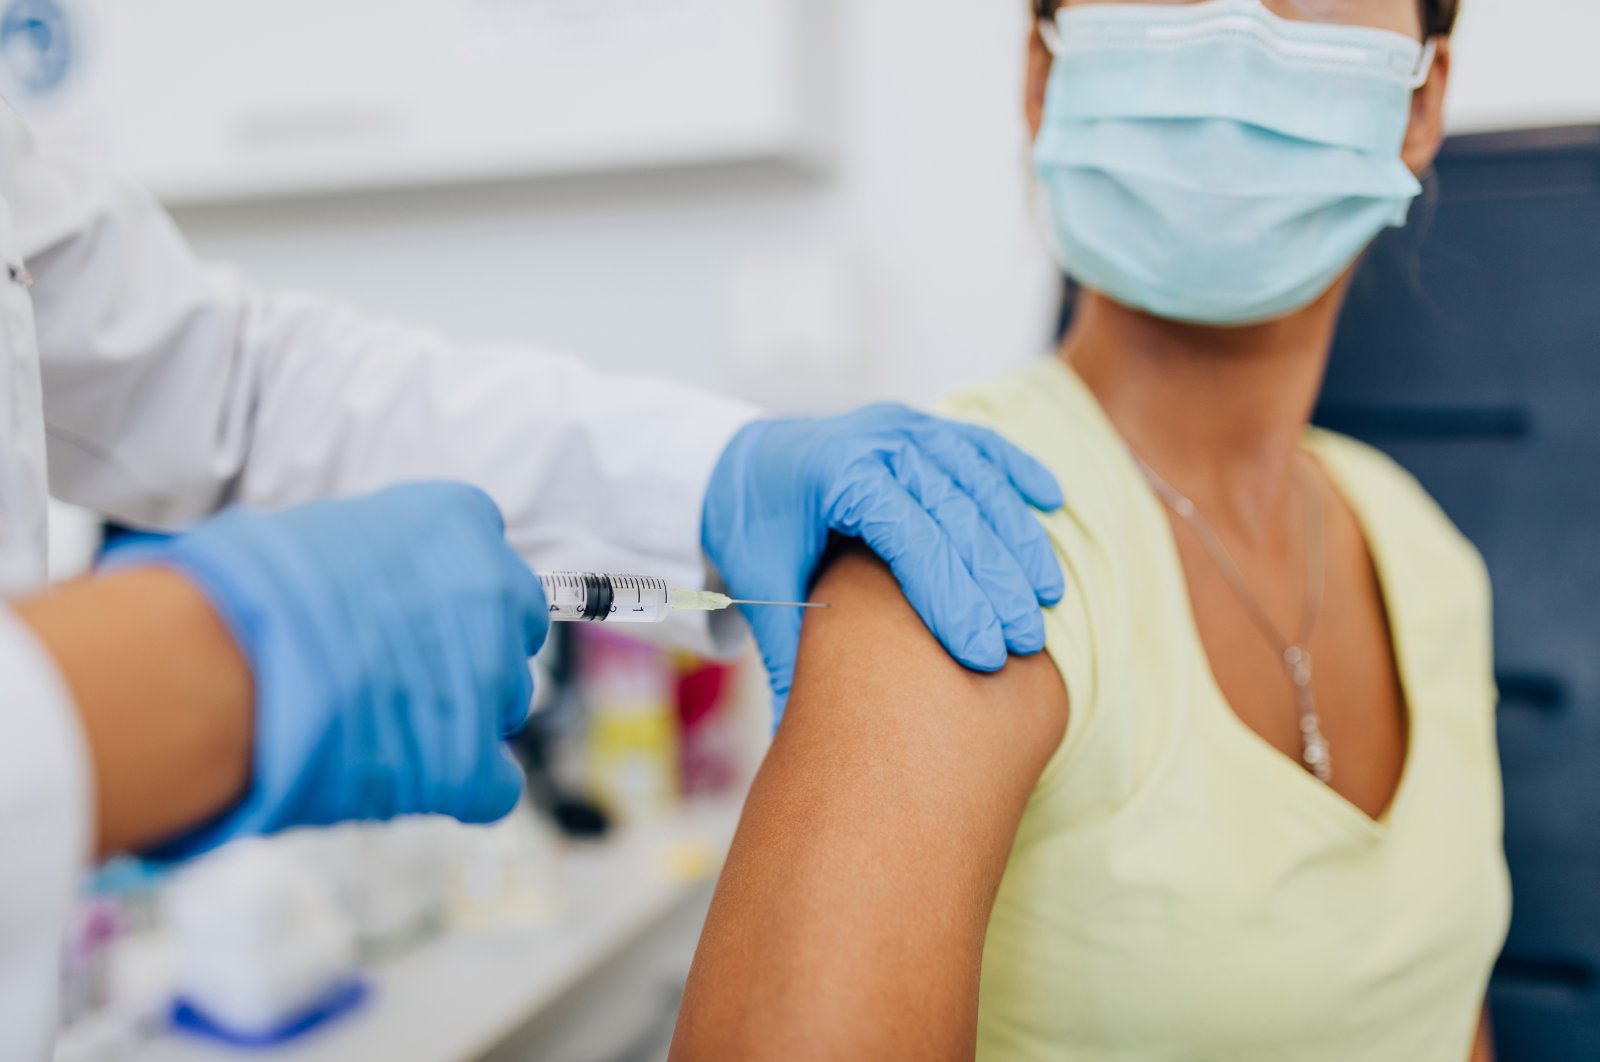 A nurse giving shot or vaccine to a patient's shoulder. (Shutterstock Photo)